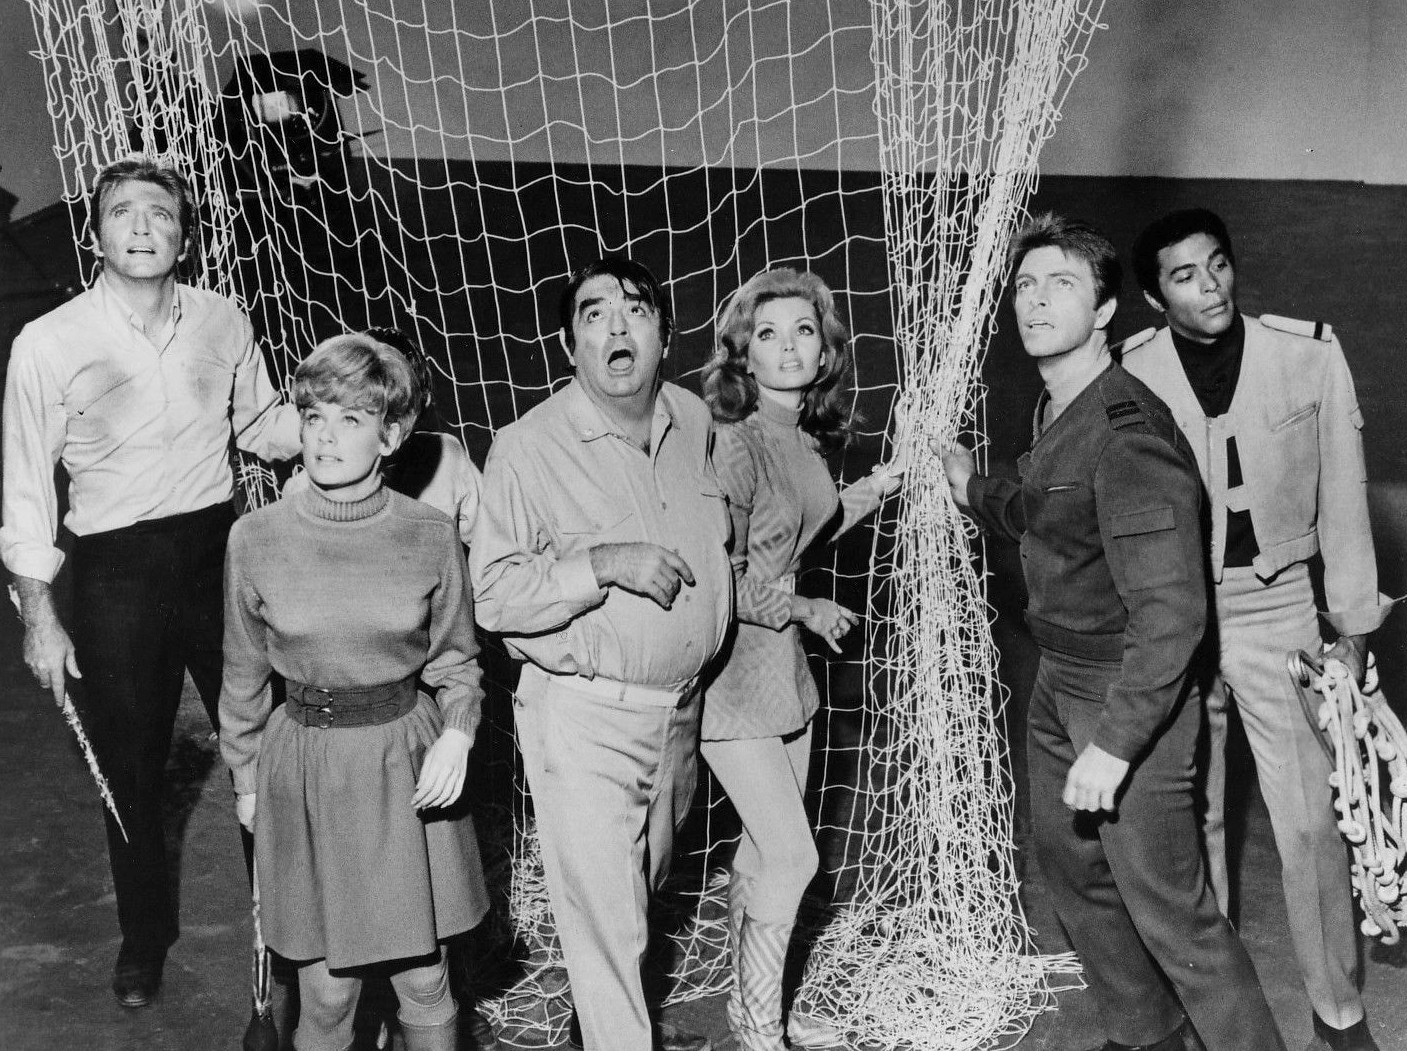 Publicity photo of the cast of Land of the Giants television program. Shown left to right: Don Matheson, Heather Young, Kurt Kasznar, Deanna Lund, Gary Conway, and Don Marshall.